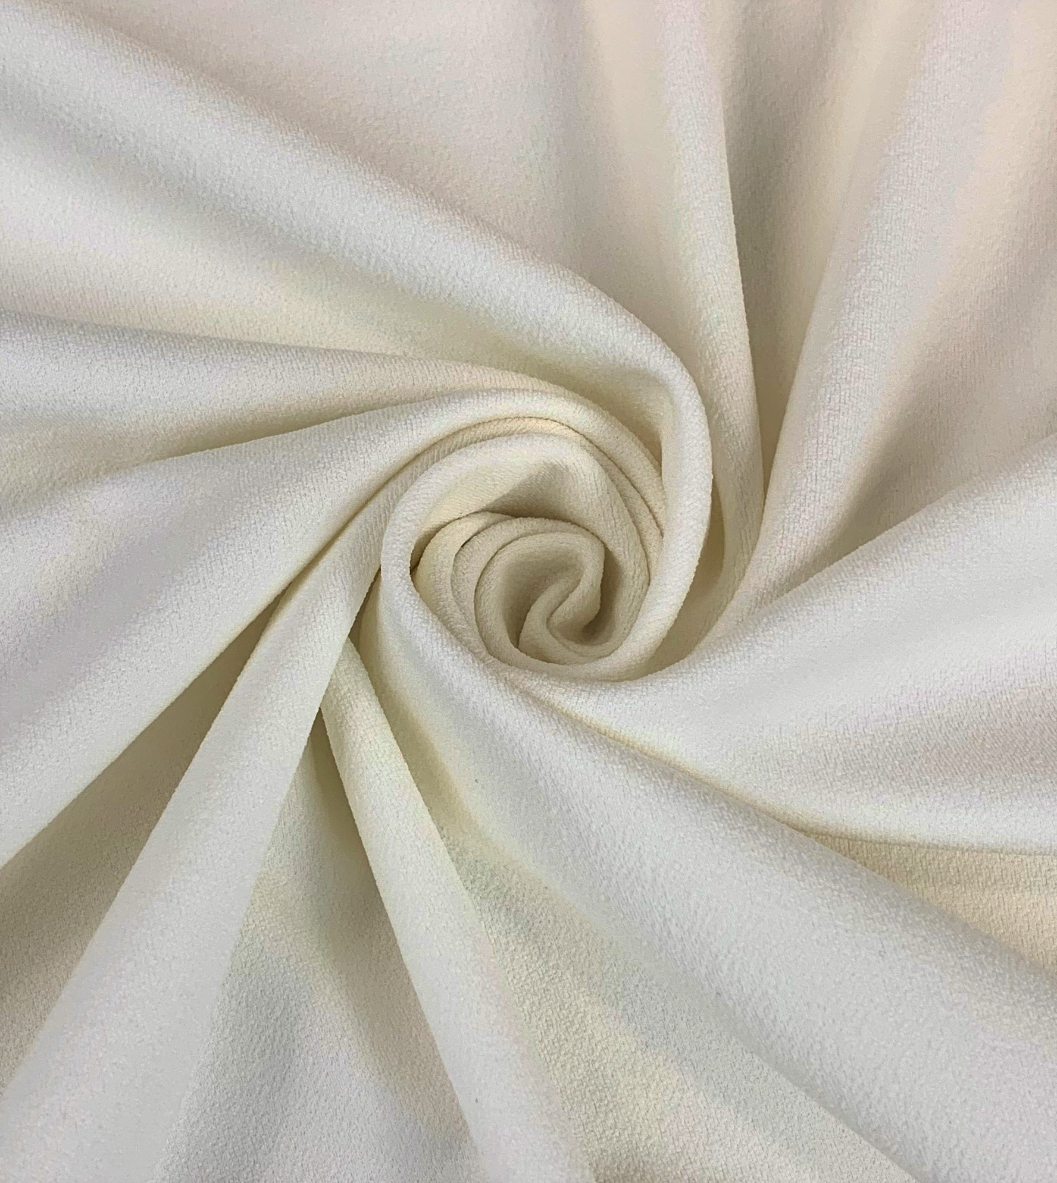 https://www.croftmill.fr/images/pictures/2-2021/01-january-2021/jk-scuba-crepe-ivory-polyester-scuba-knitted-stretch-crepe-fabric-close-up-fabric-photo.jpg?v=c67c8923